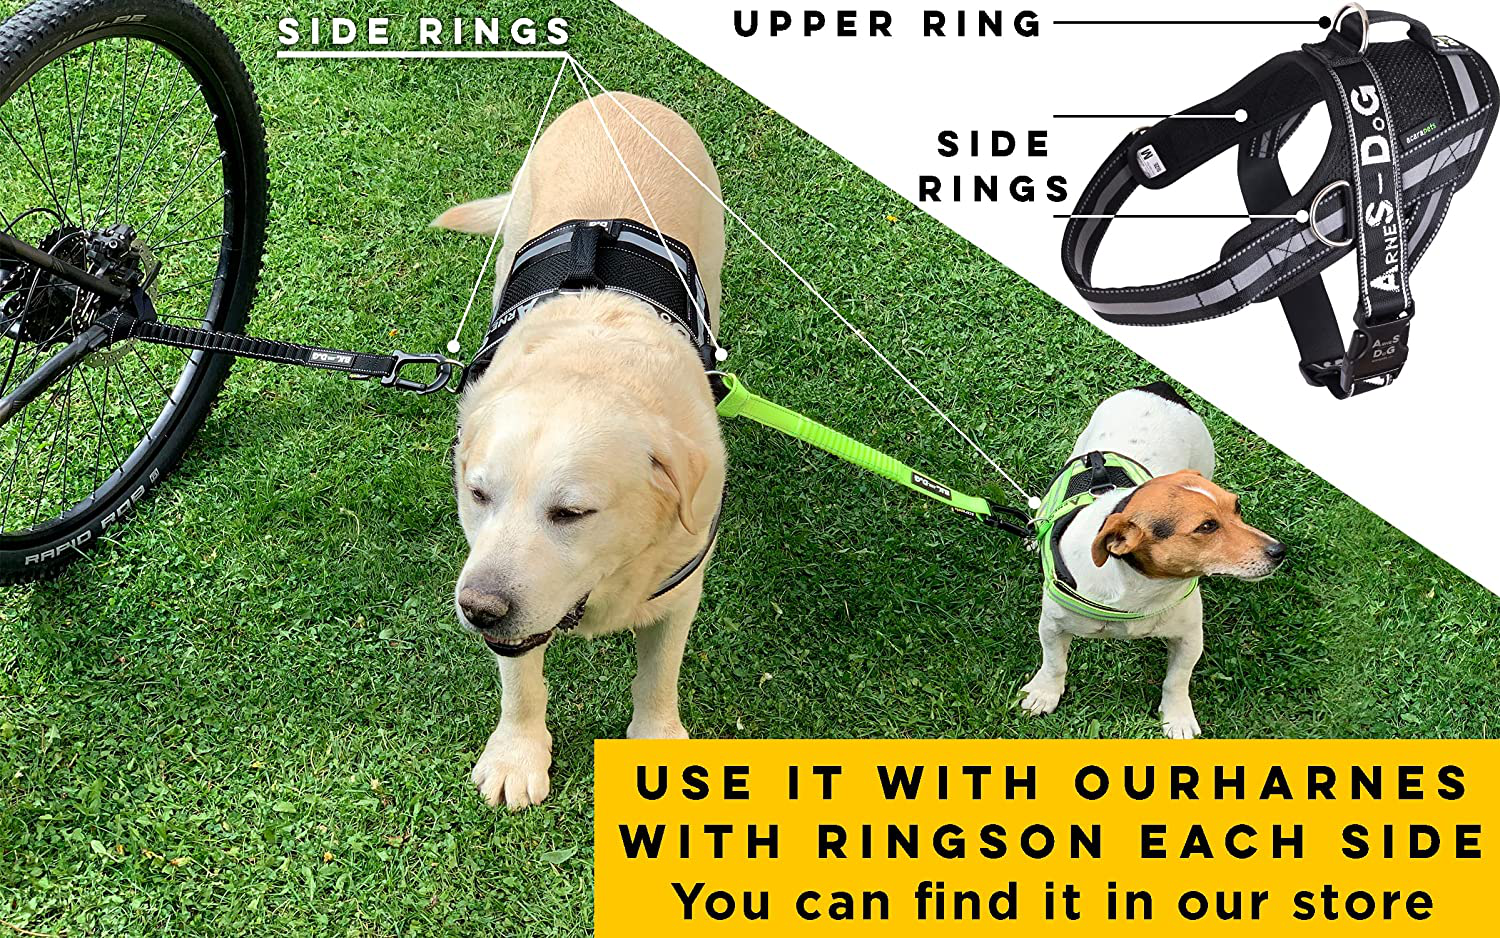 Dog Bike Leash, Hands Free Dog Leashes. Dog Bicycle Lead for Small, Medium and Large Dogs, Designed to Lead One or More Dogs with Maximum Safety, Easy Assembly without Tools. Patented Product. Animals & Pet Supplies > Pet Supplies > Dog Supplies > Dog Treadmills BIKE AND DOG   